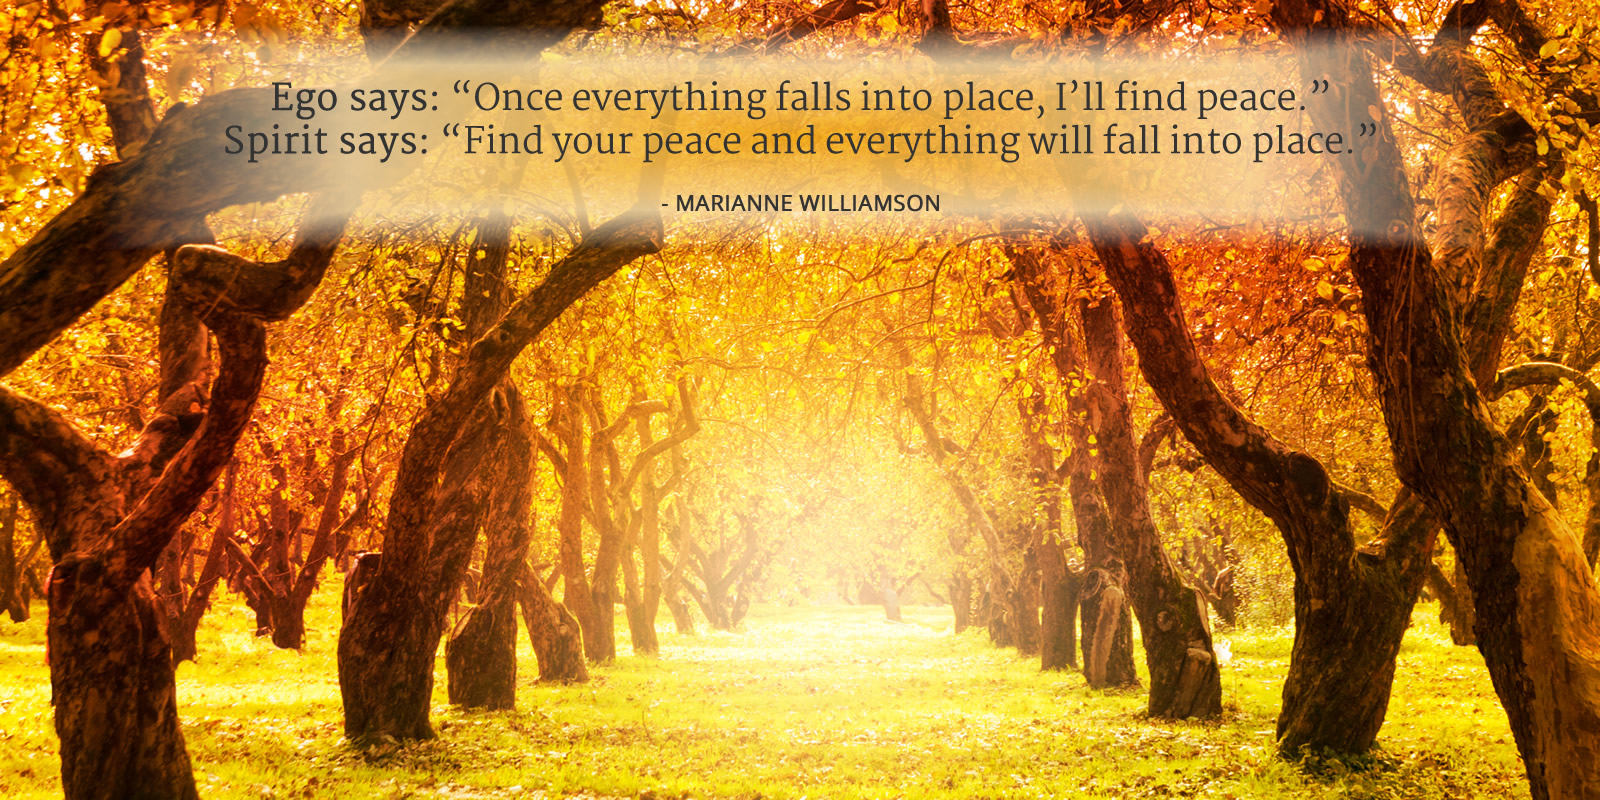 Ego says: Once everything falls into place, I'll find peace. Spirit says: Find your peace and everything will fall into place. - Marianne Williamson